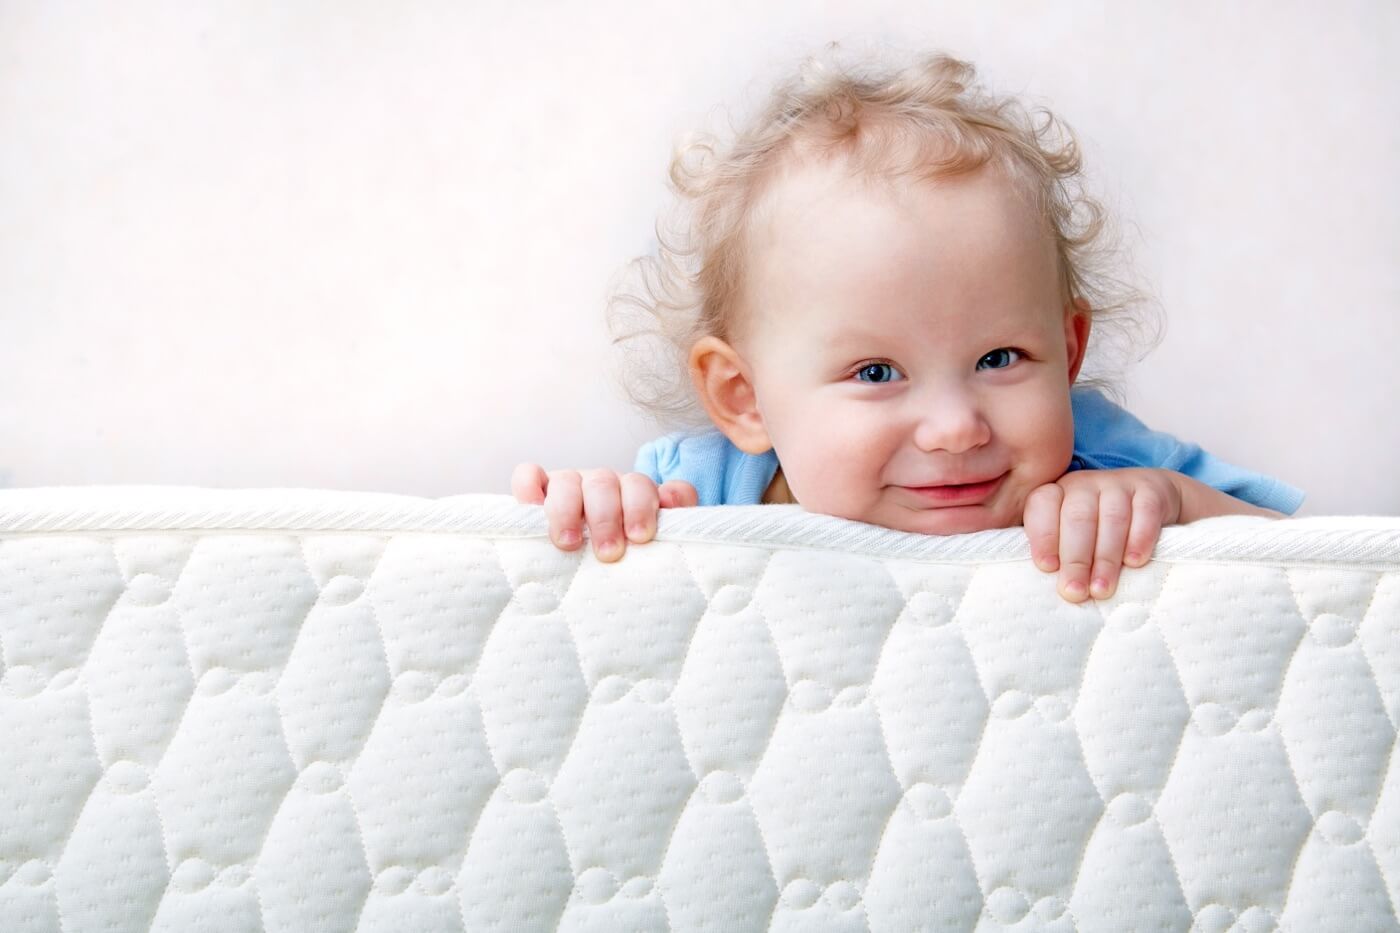 Baby holding the mattress close up